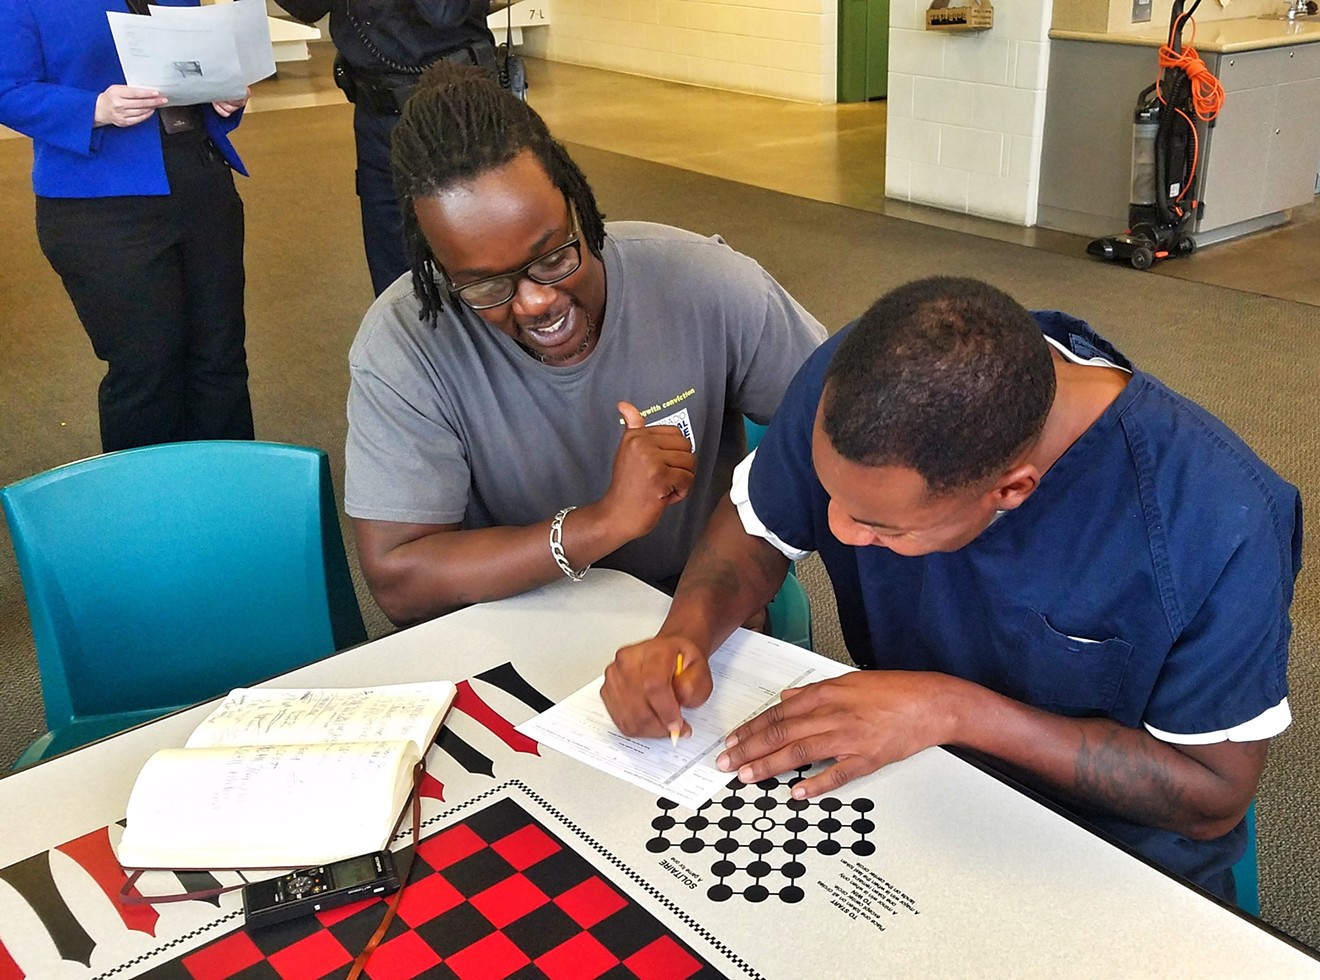 Juston Cooper helps an inmate named Jamayl vote.